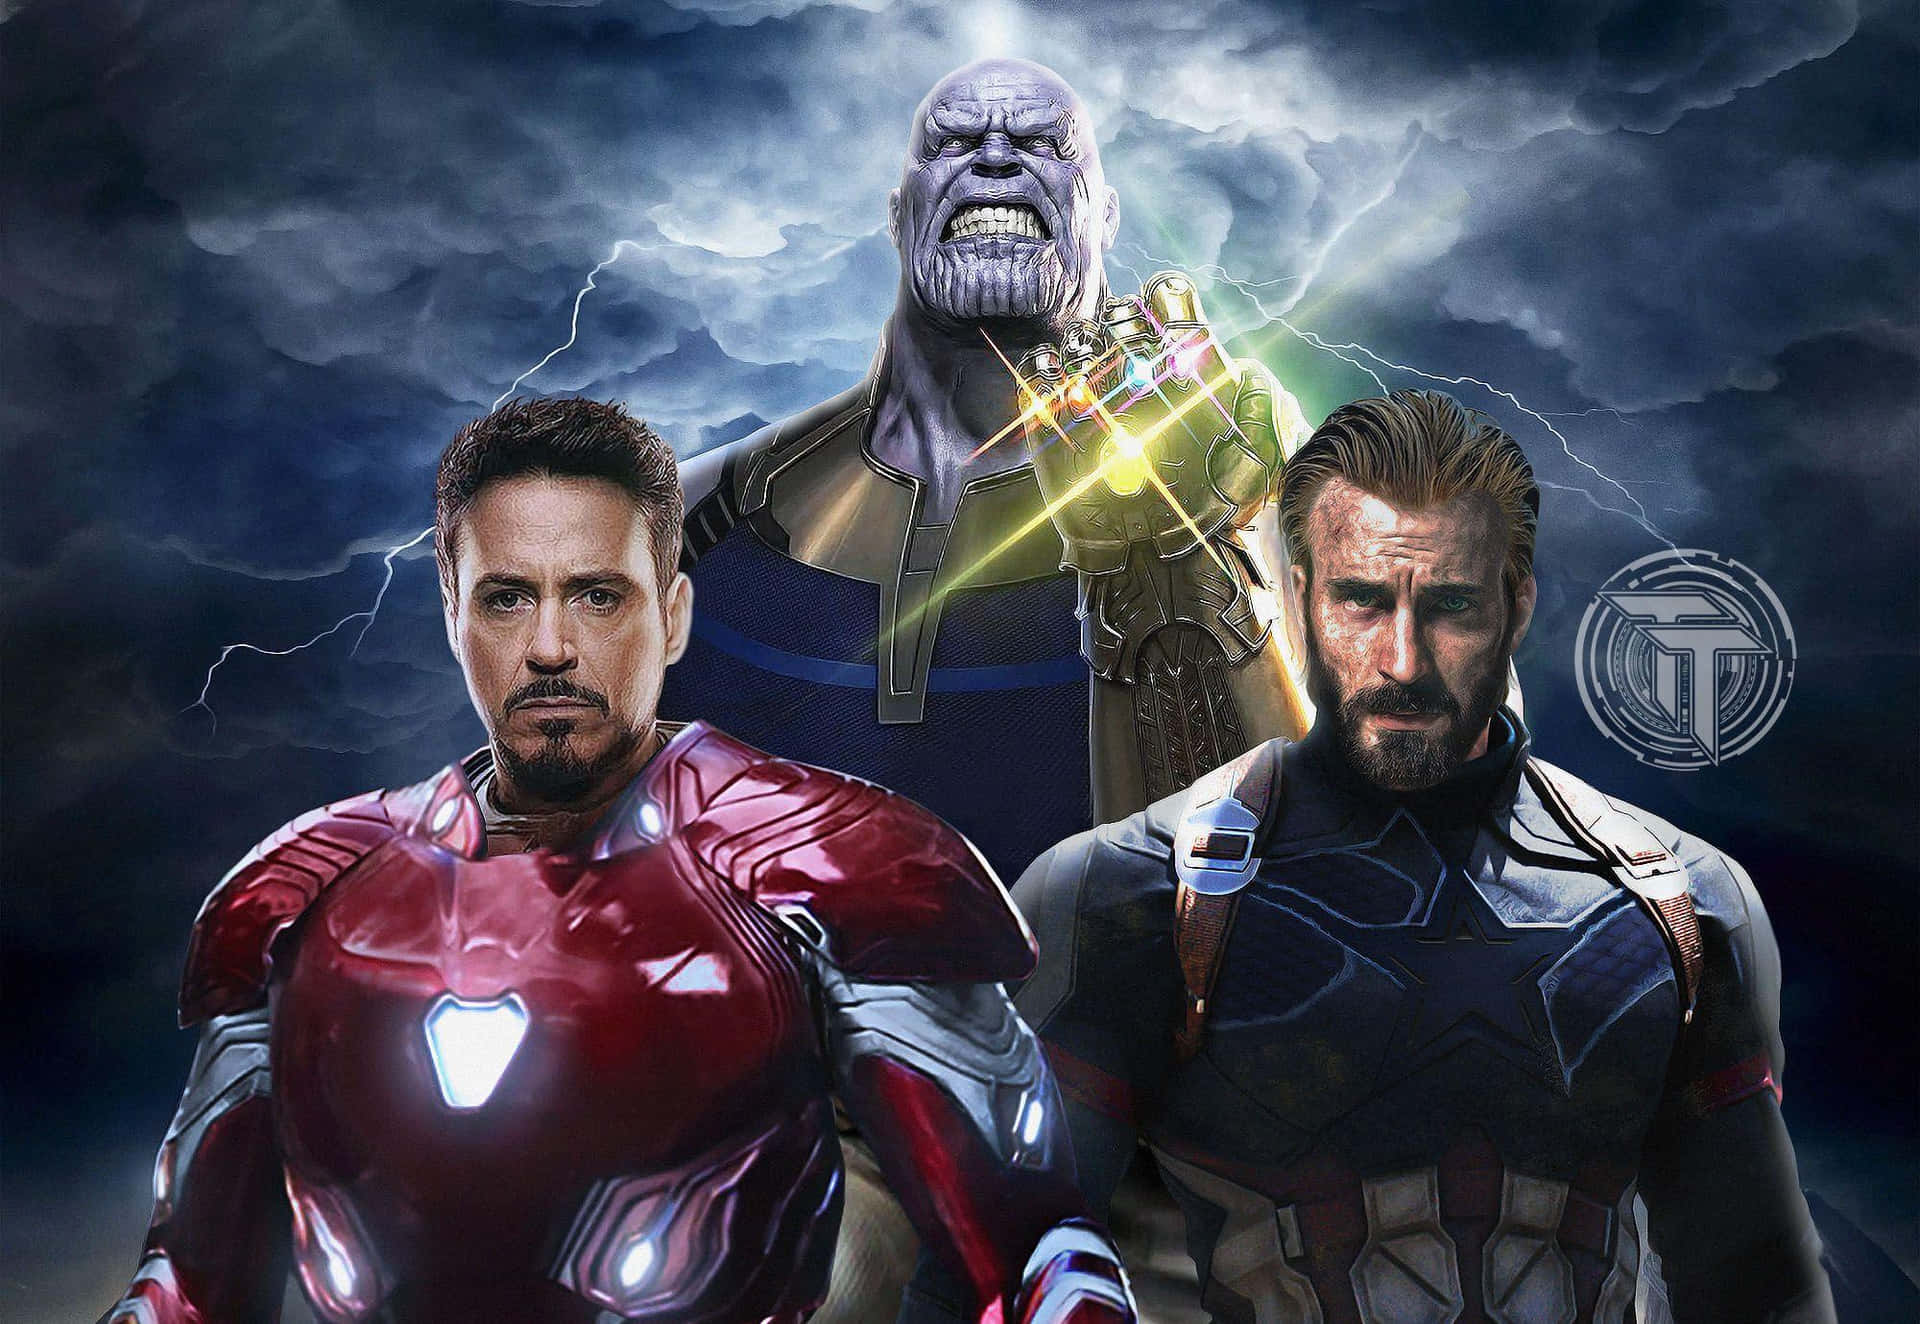 Iron Man takes on Thanos in a spectacular duel Wallpaper